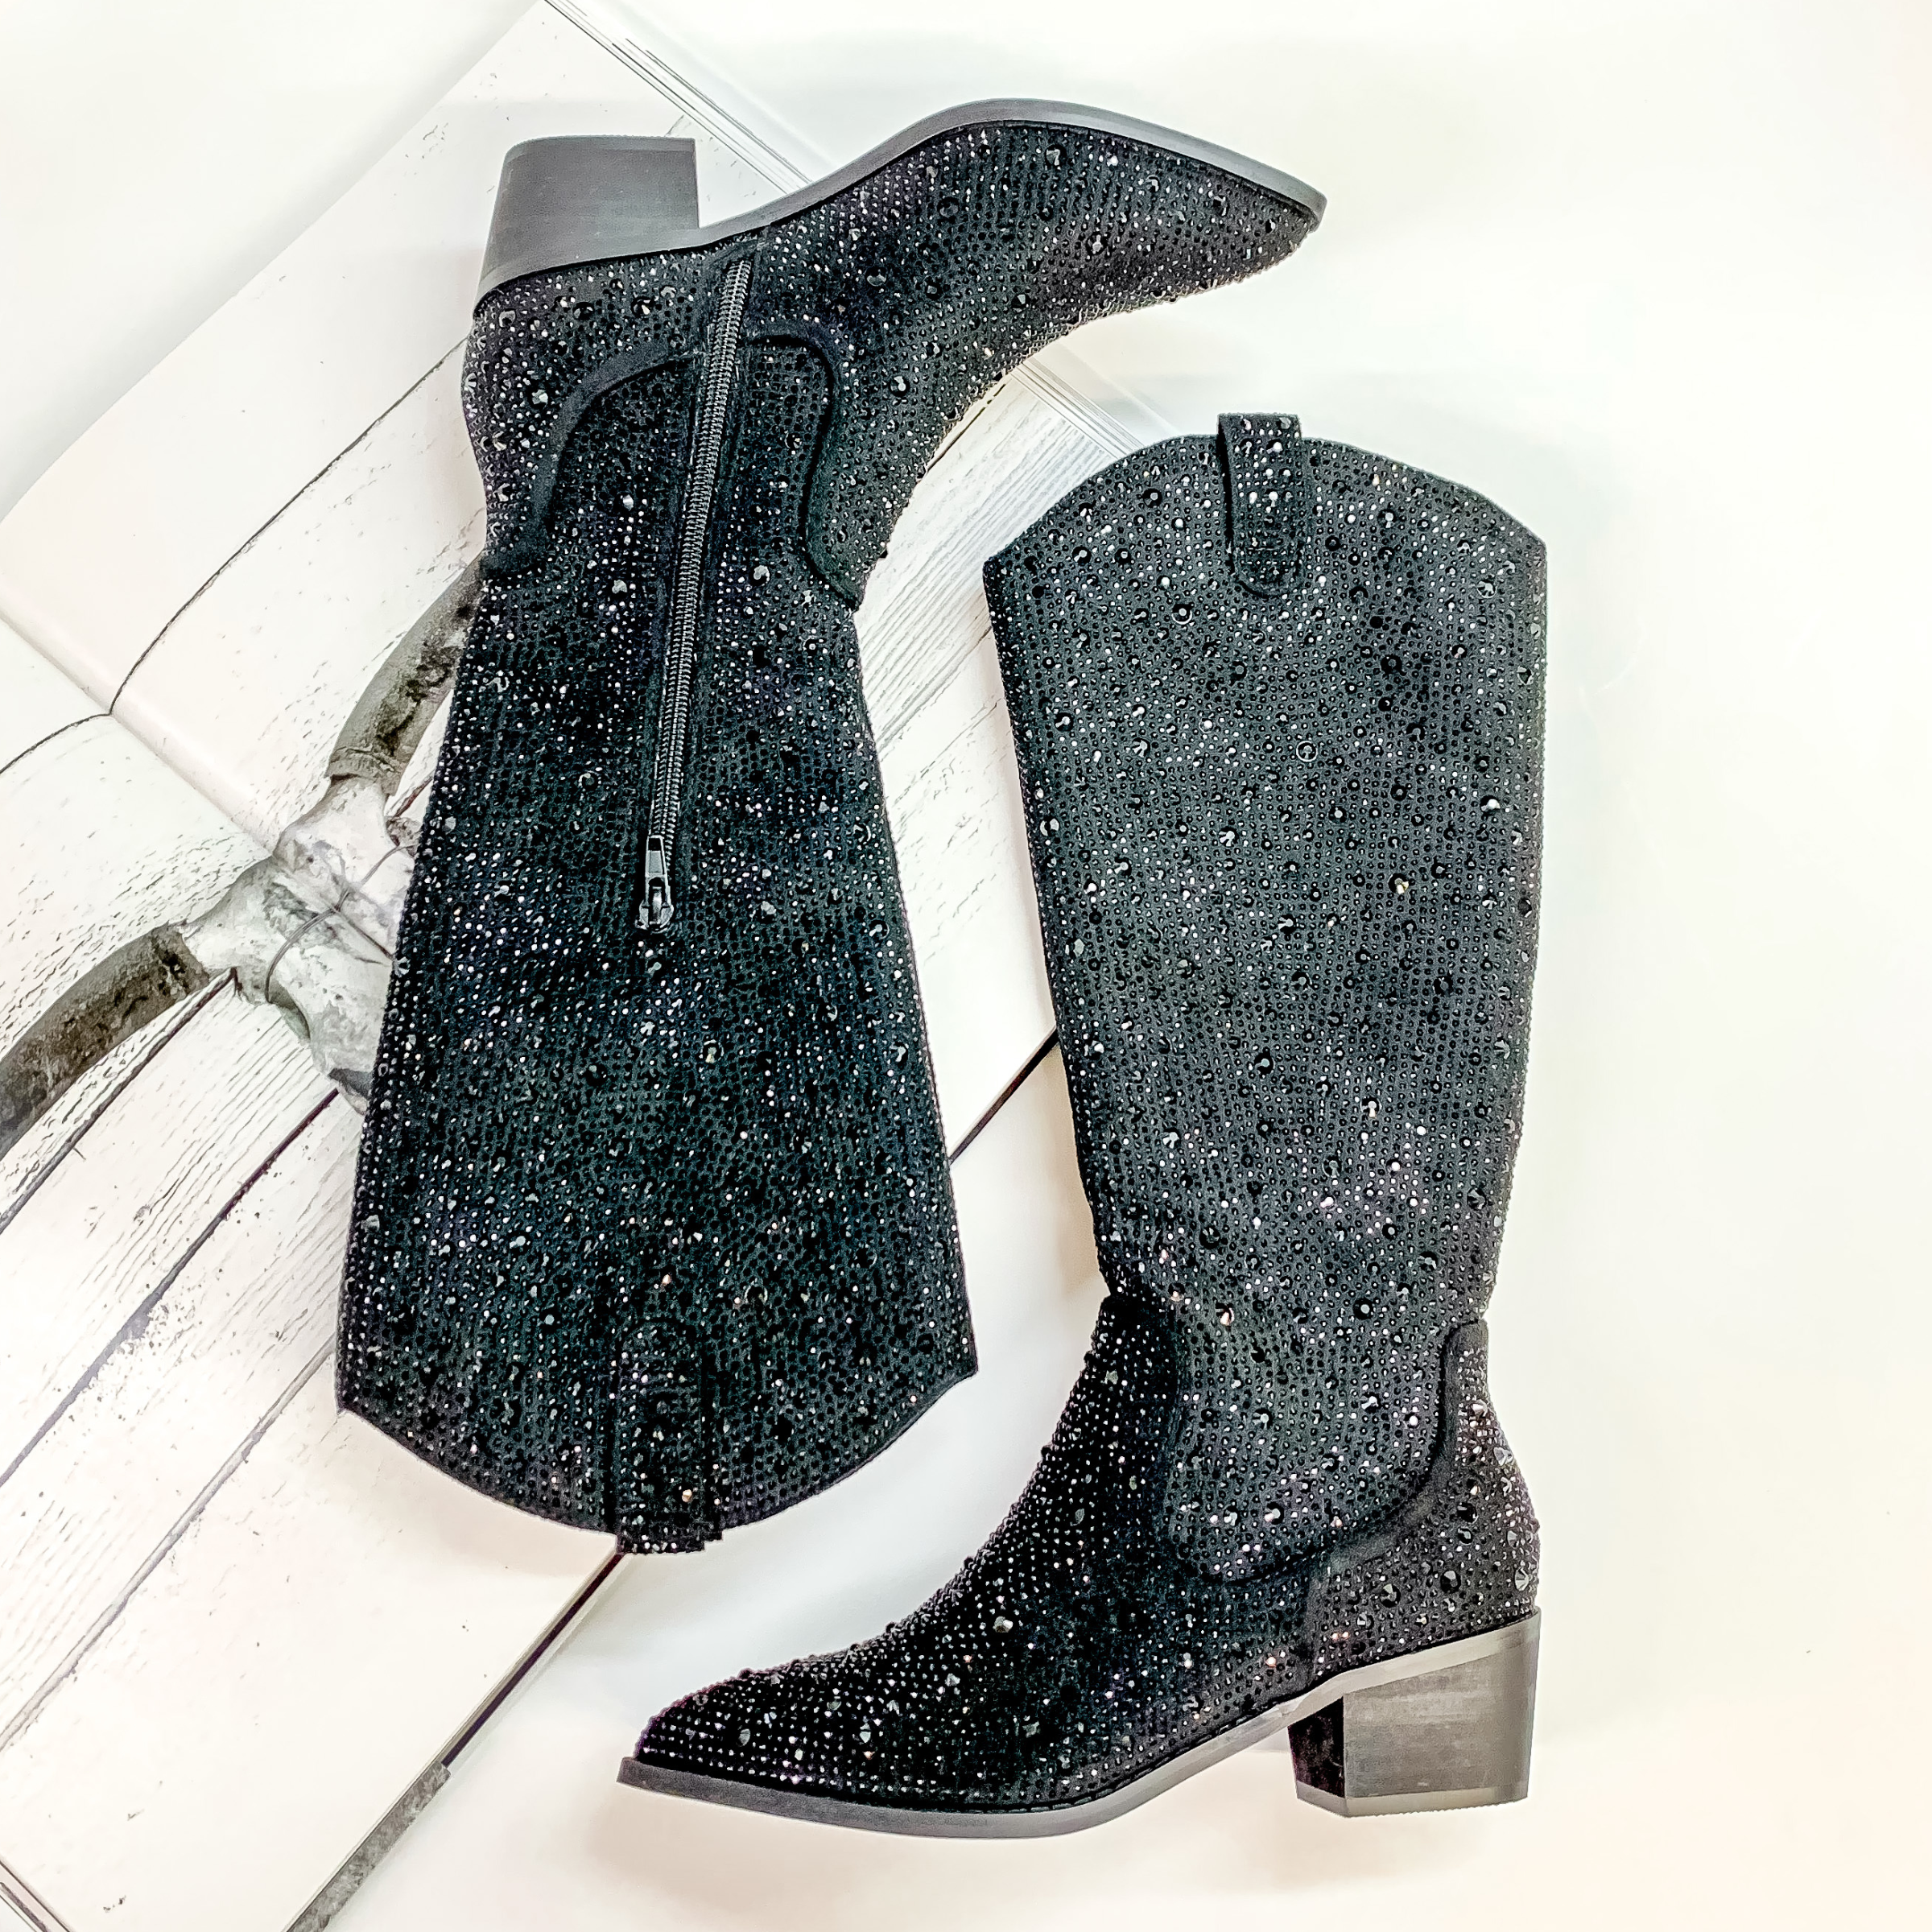 Very G | Kady High Rhinestone Cowboy Boots in Black - Giddy Up Glamour Boutique